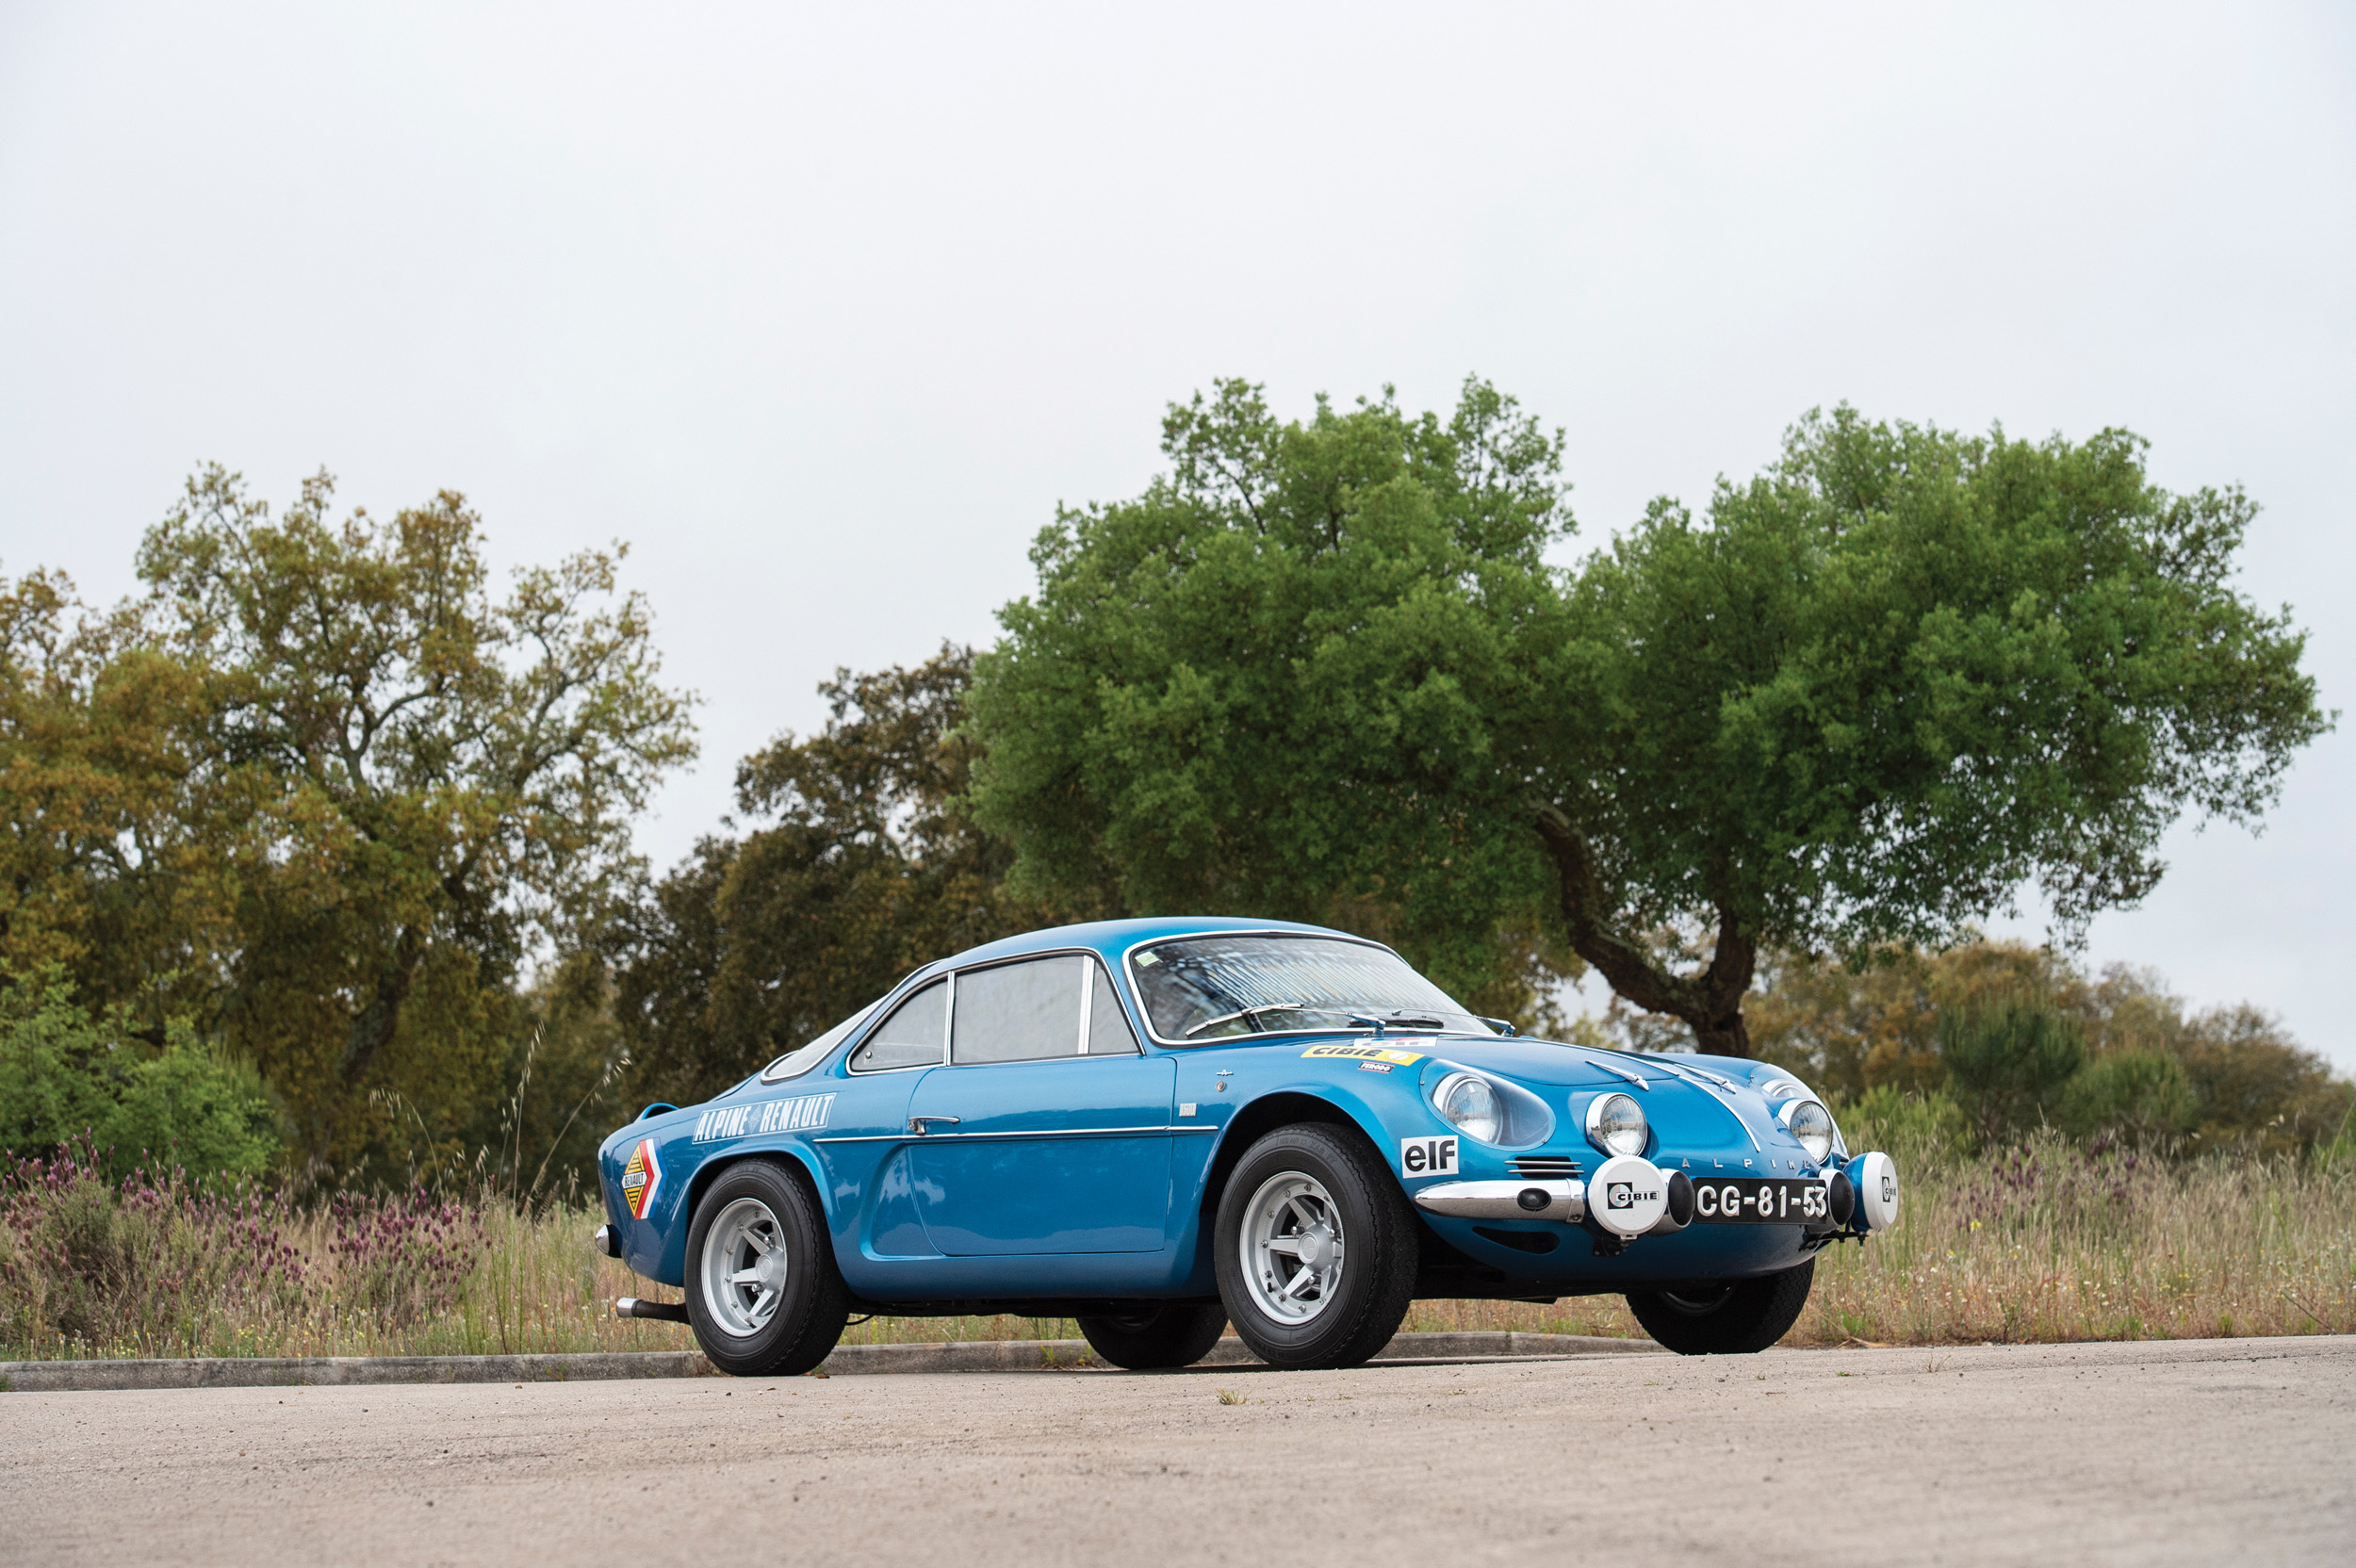 1972 Alpine A110 1300 (Credit- Tom Wood ©2019 Courtesy of RM Sotheby's) - Portuguese Sale